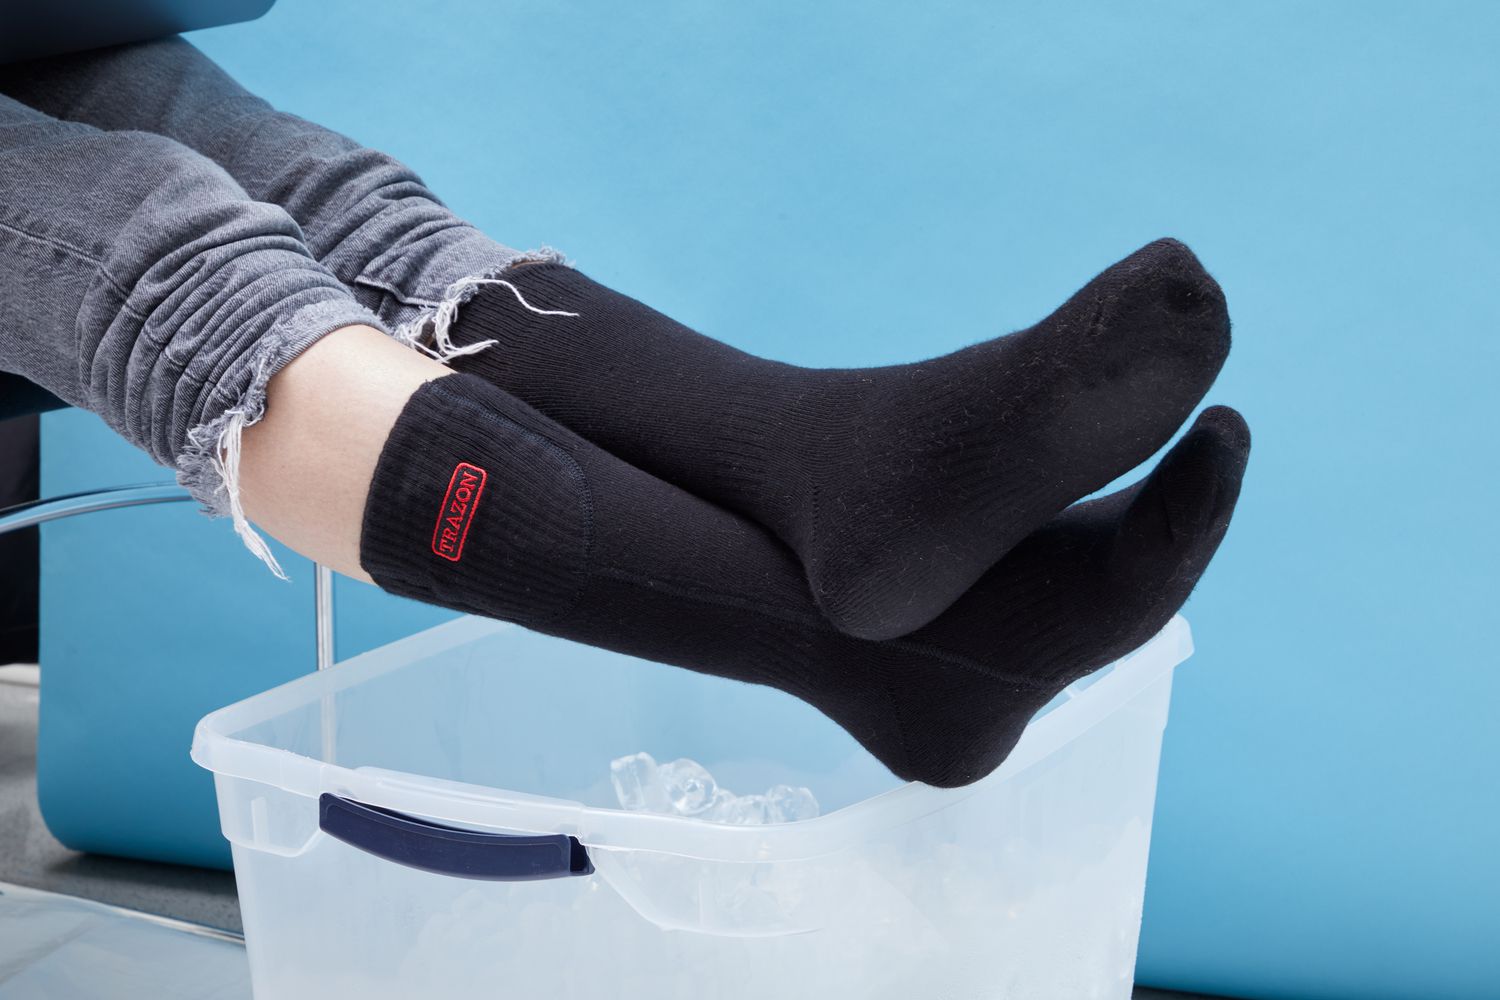 Heated Socks Review: Stay Warm and Cozy All Winter